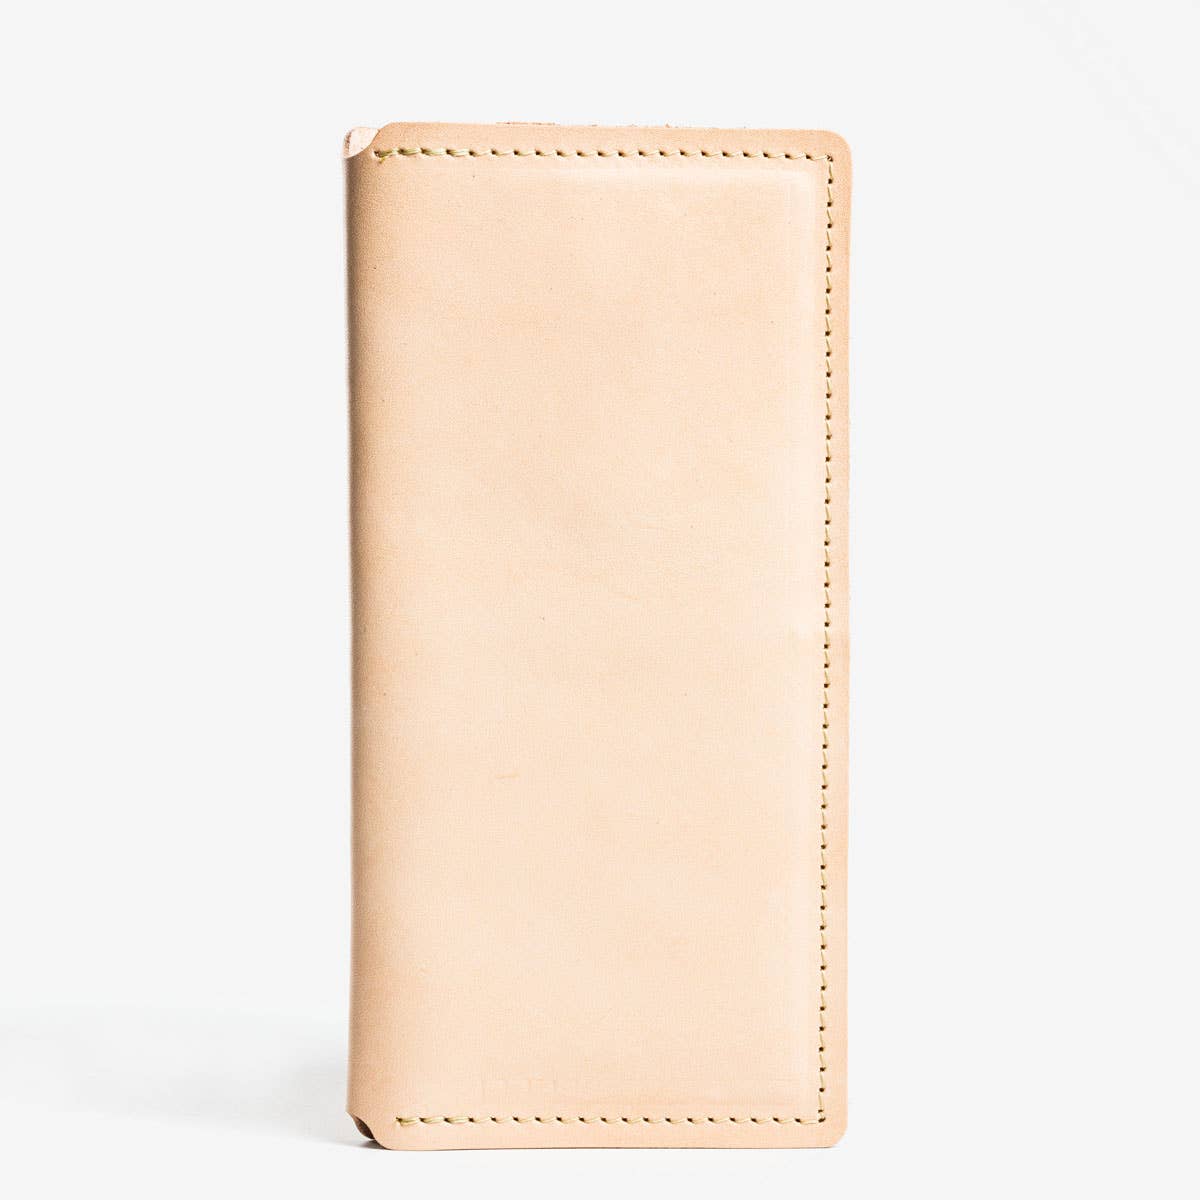 Handmade Tall Cowboy Leather Wallet